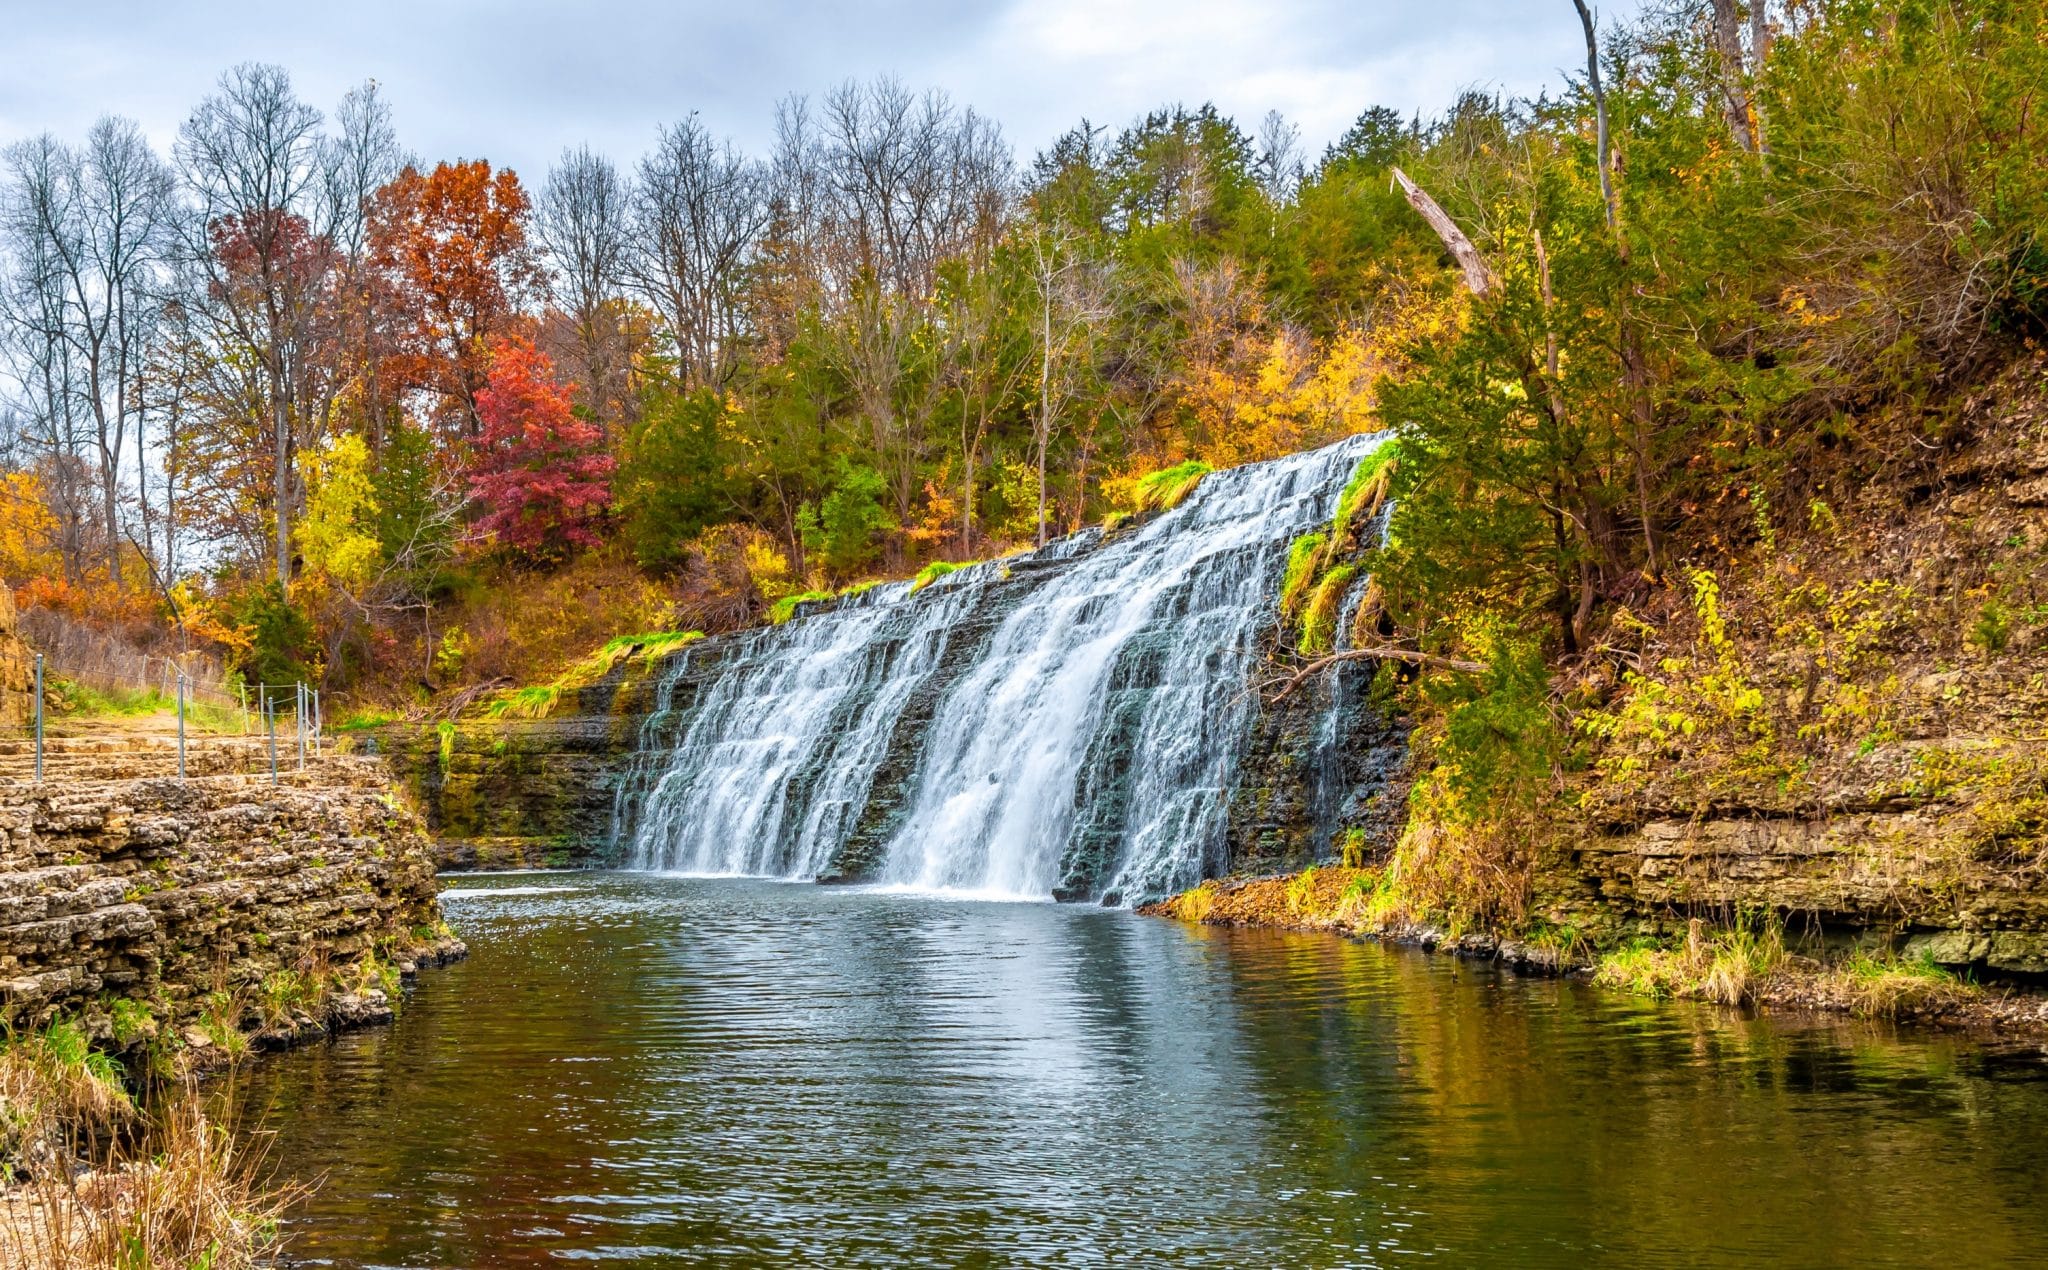 Image of the Thunder Bay Falls located in Galena near Chicago